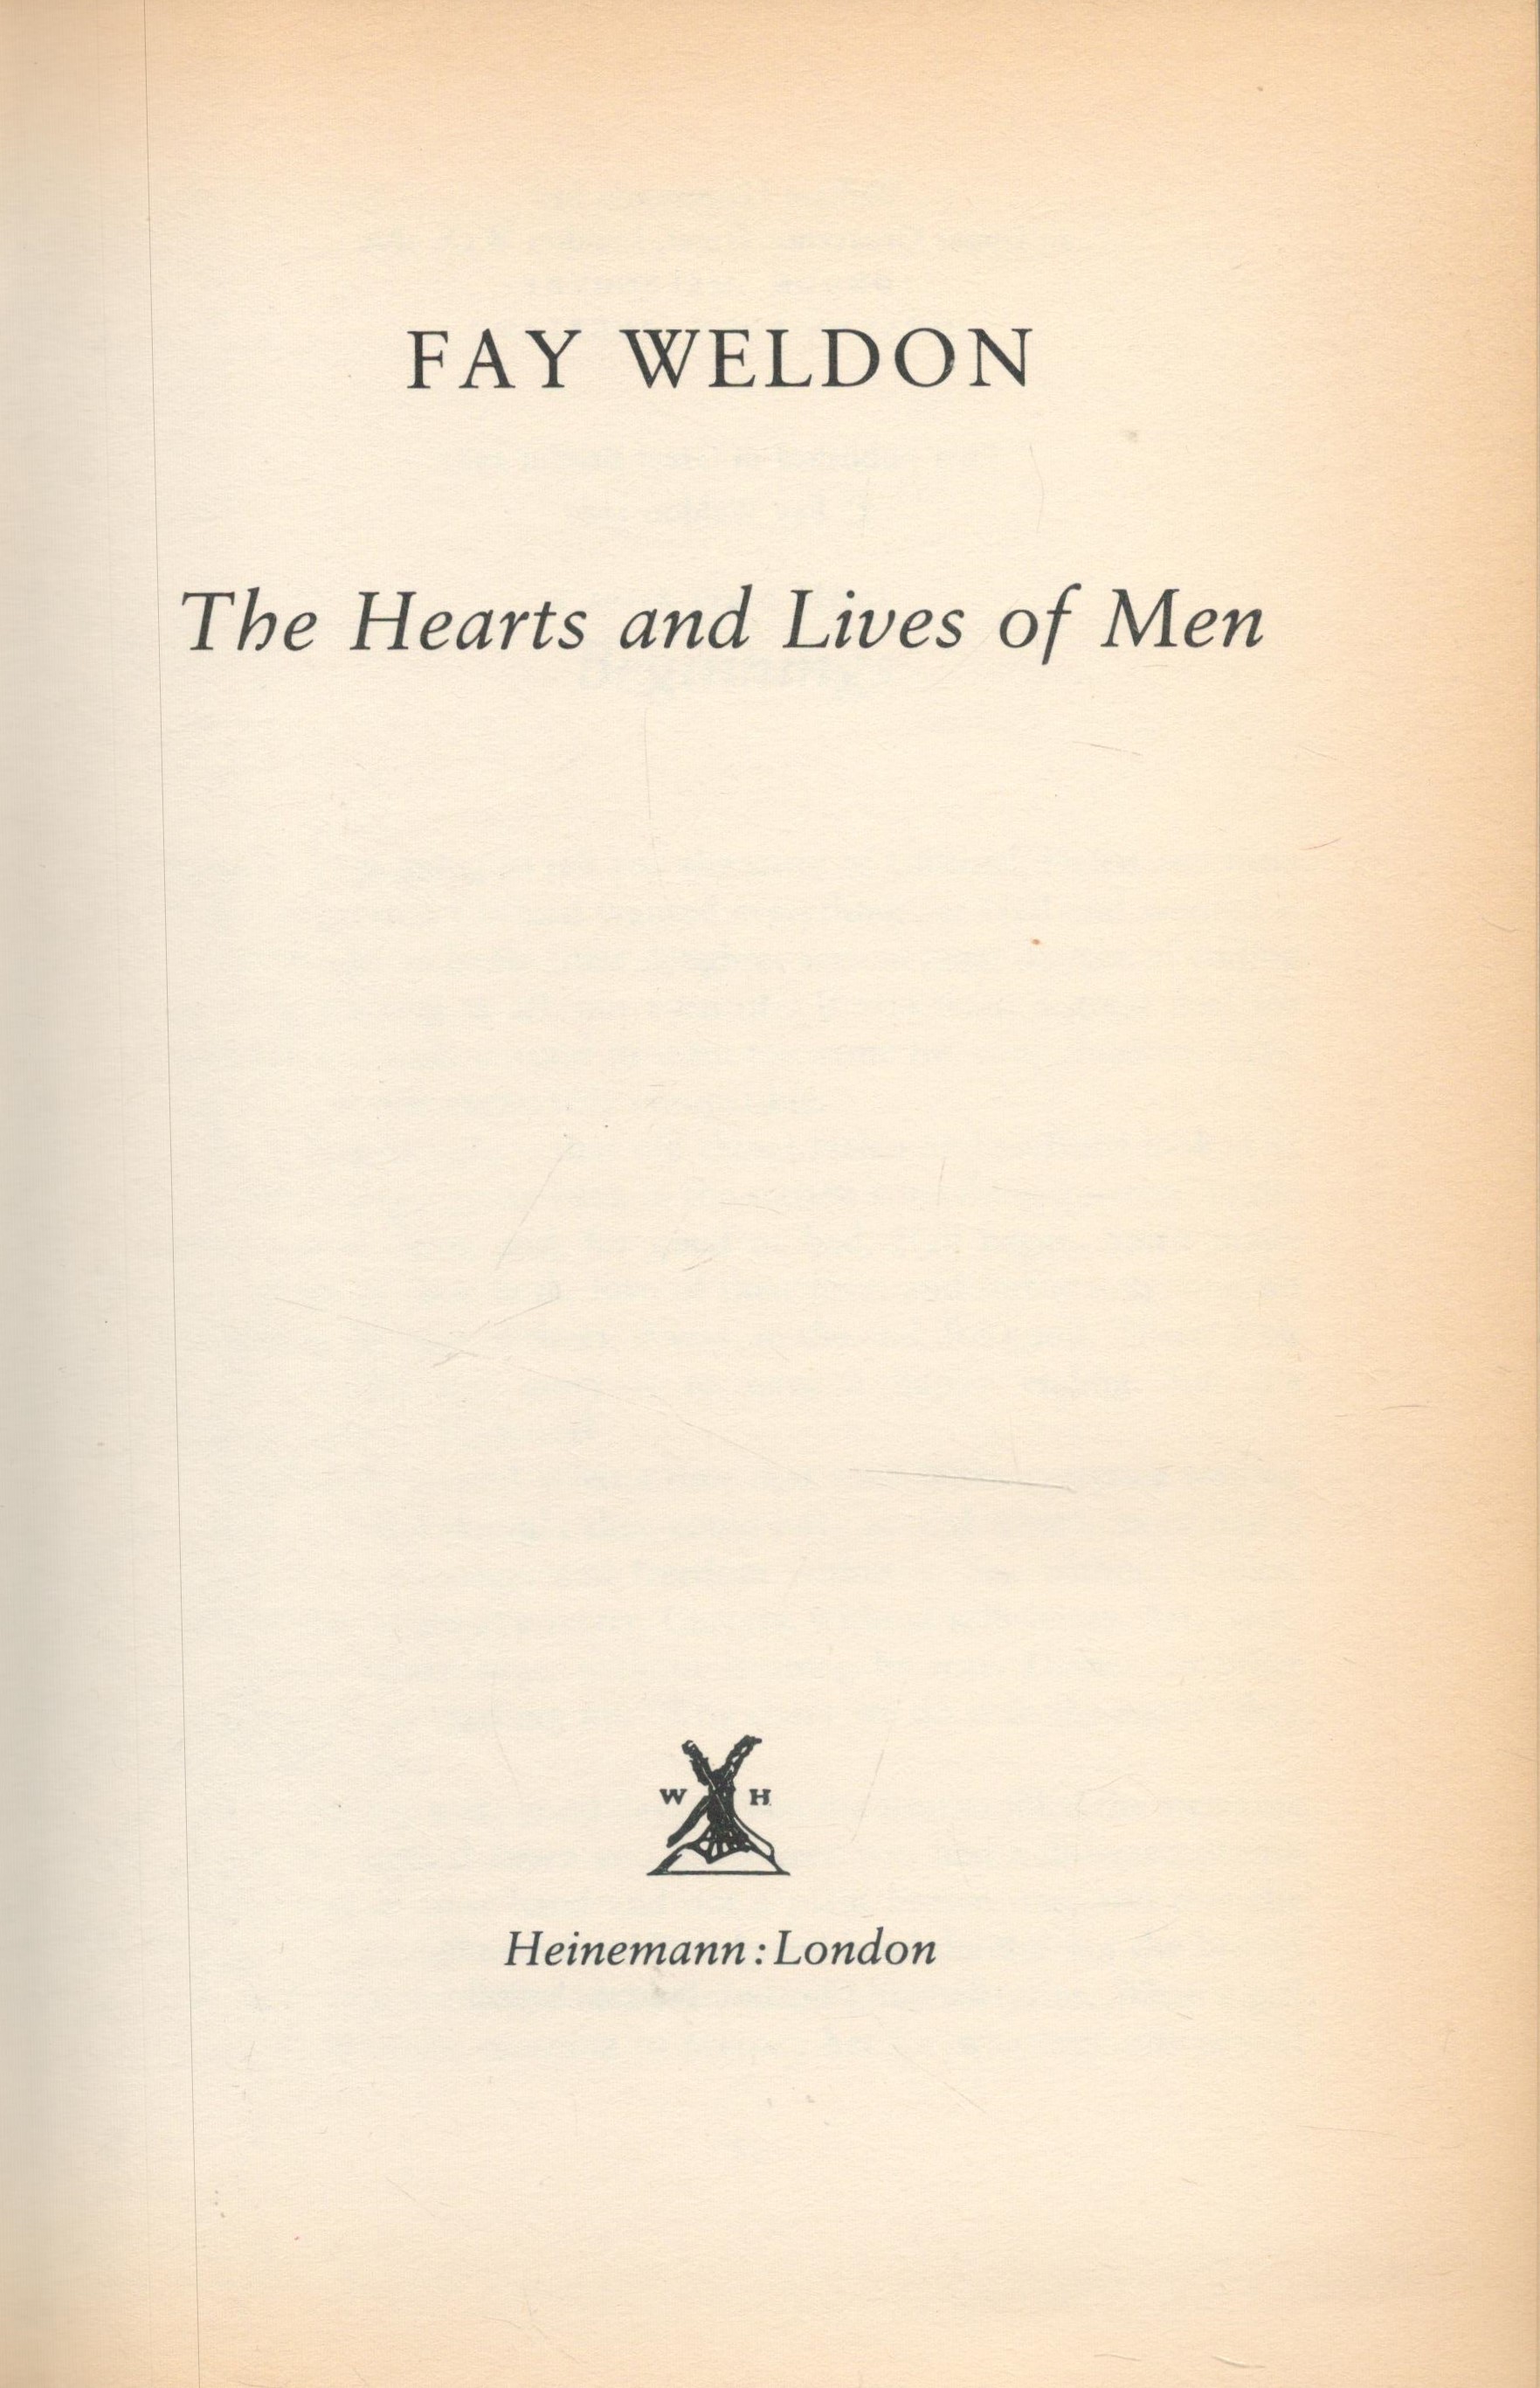 The Hearts and Lives of Men by Fay Weldon 1987 First Edition Hardback Book with 328 pages - Image 2 of 3